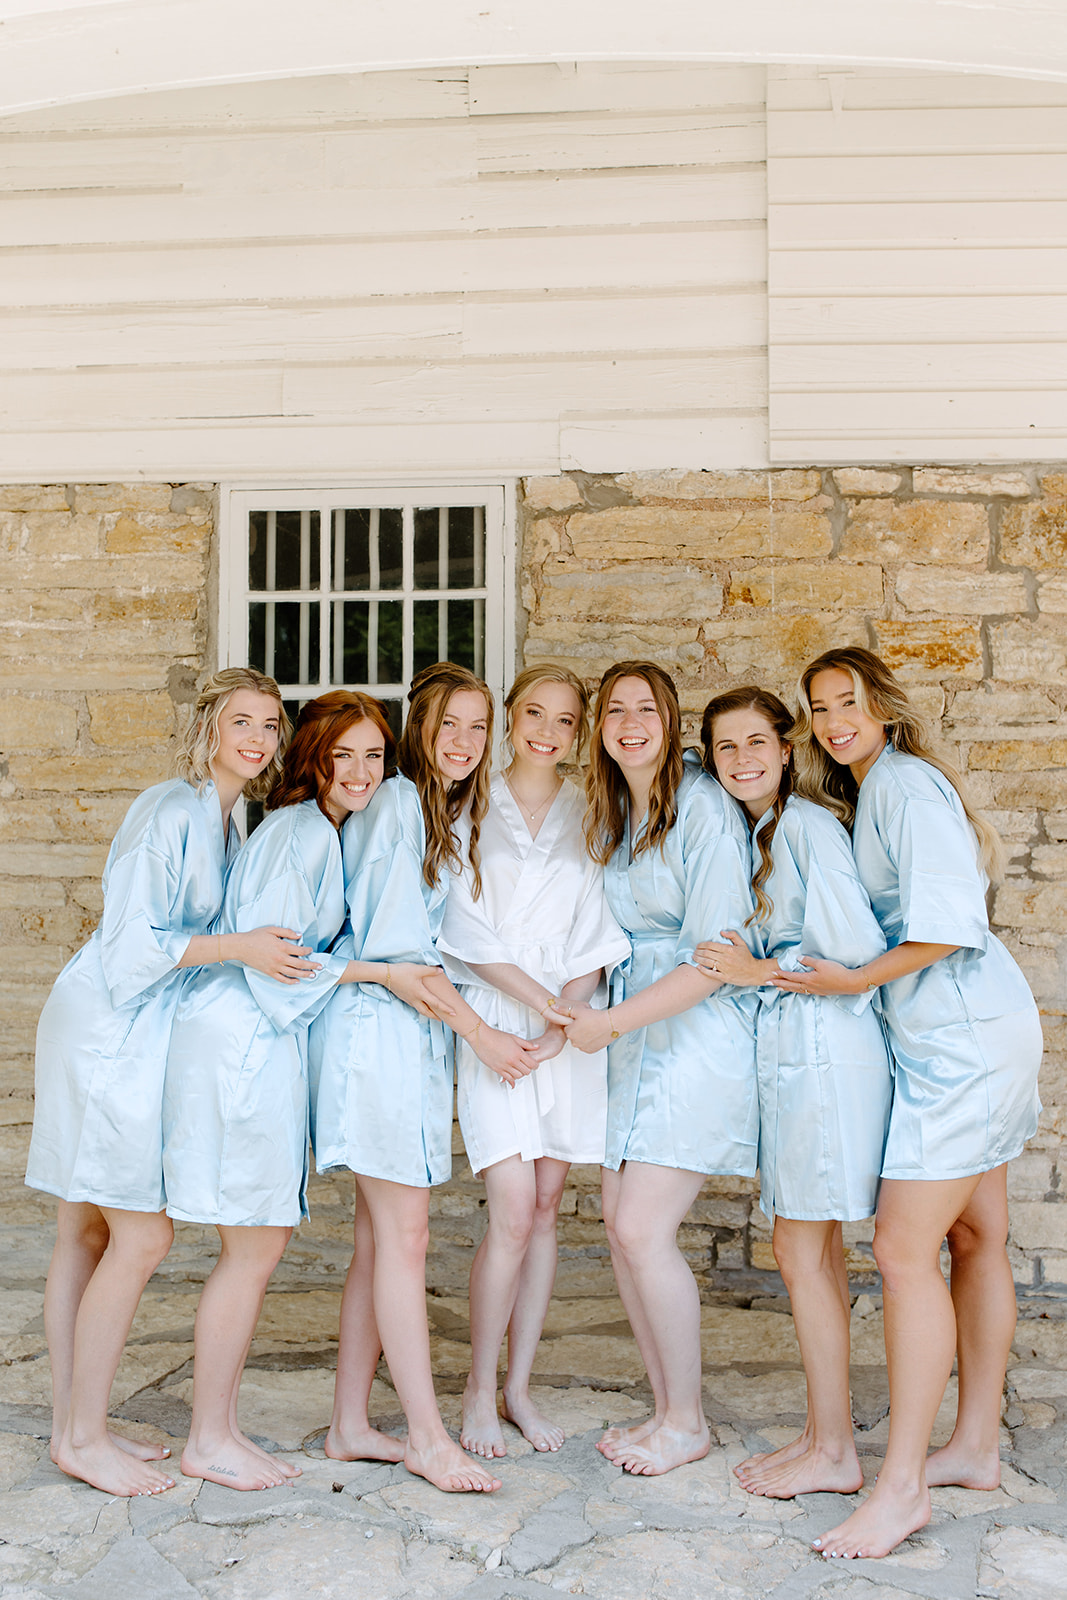 Bride and her bridesmaids pose in matching robes